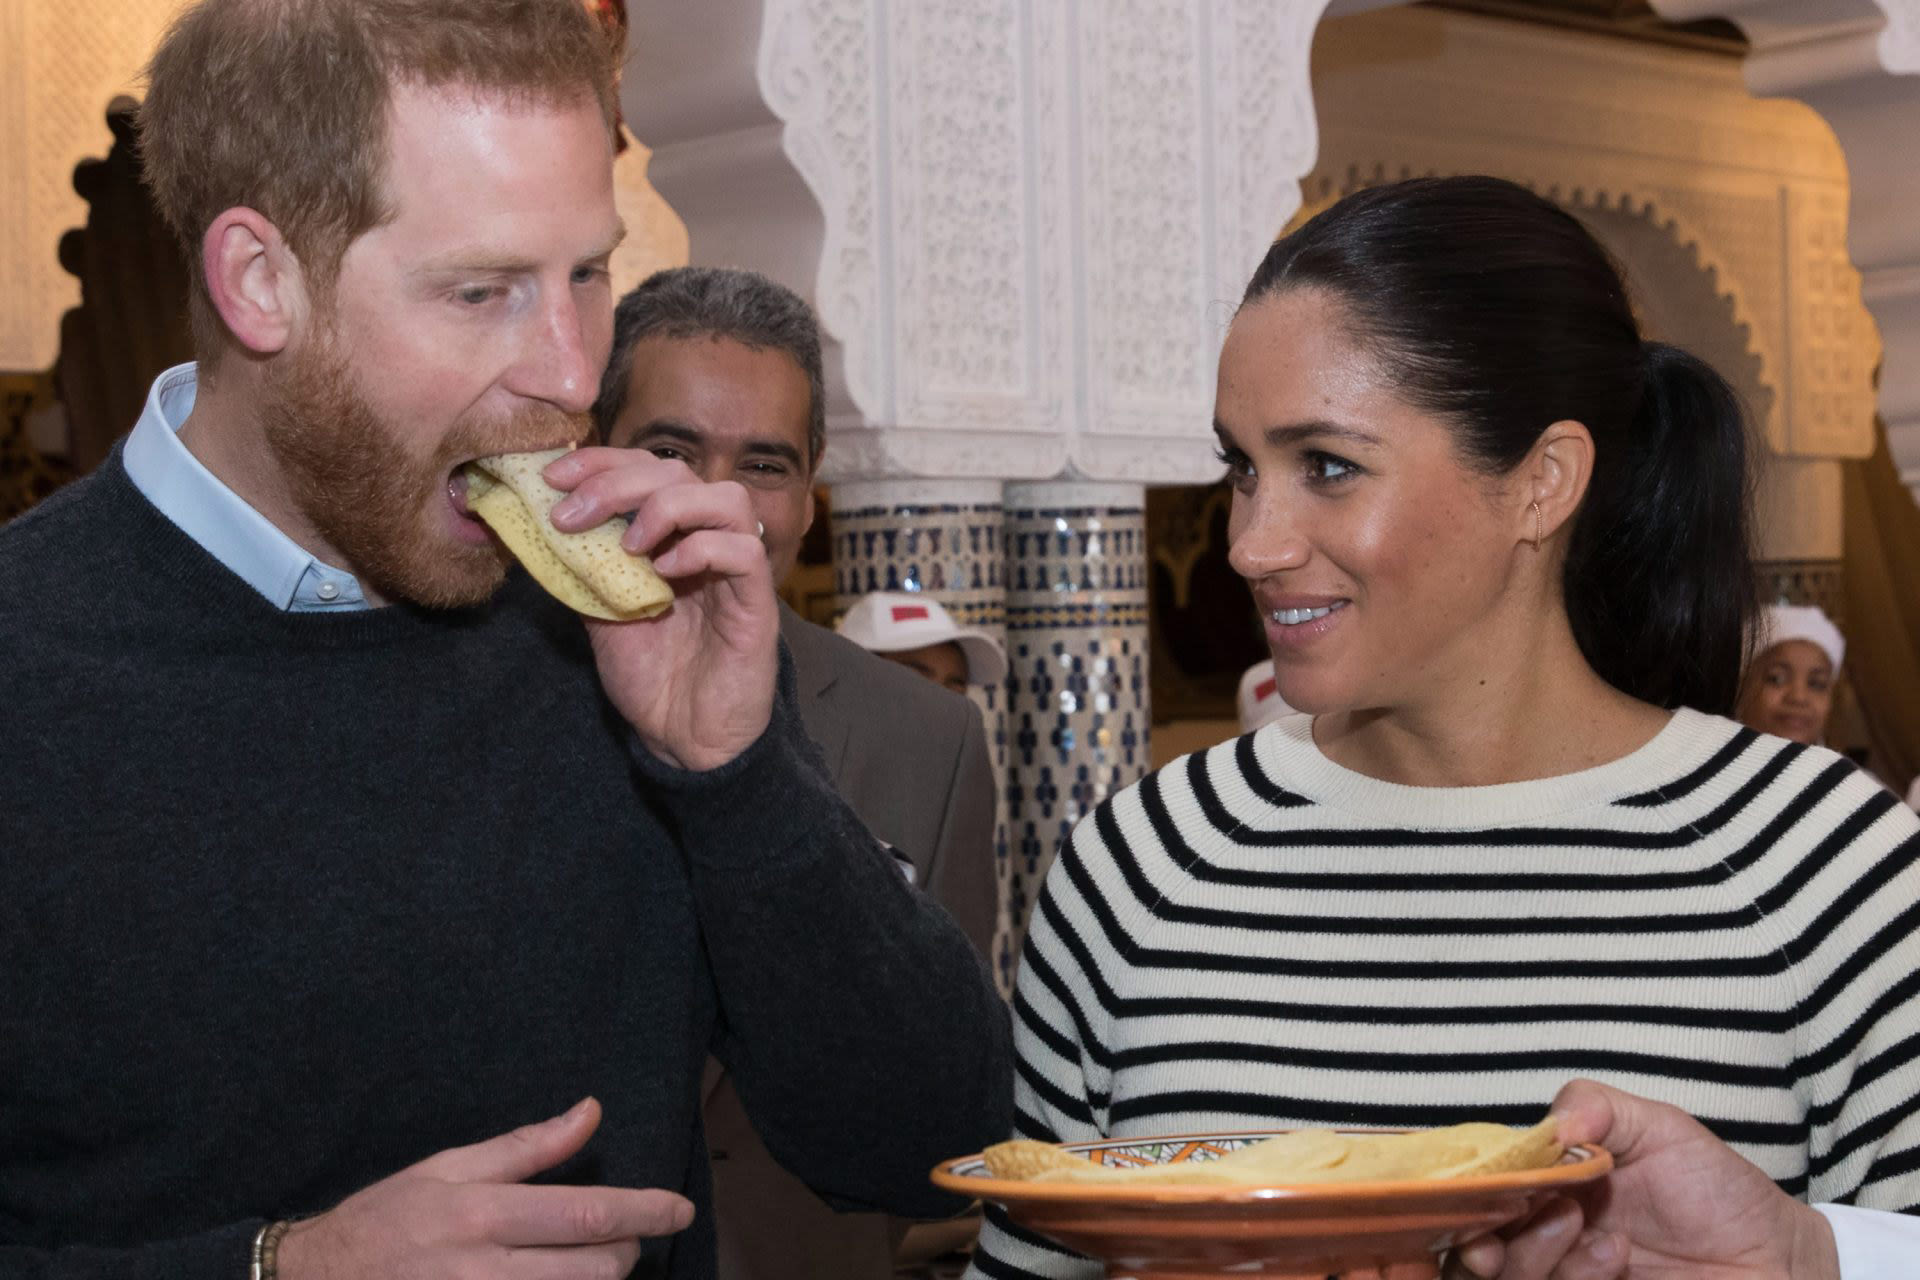 Can Meghan Markle cook? The Duchess of Sussex's Netflix upcoming cooking show